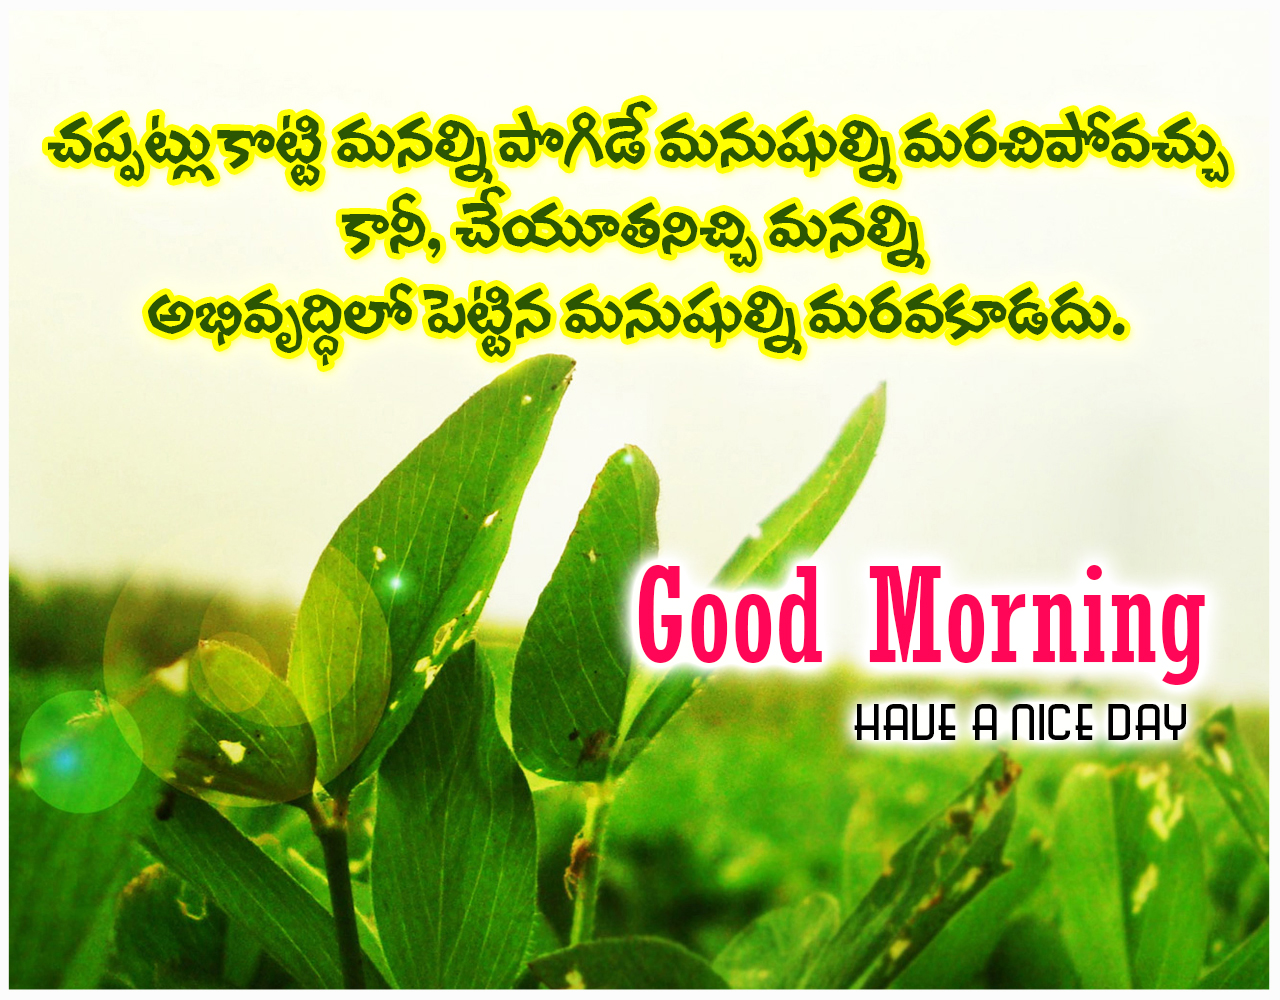 Telugu Good Morning Images Success Quotations for Relationship ...